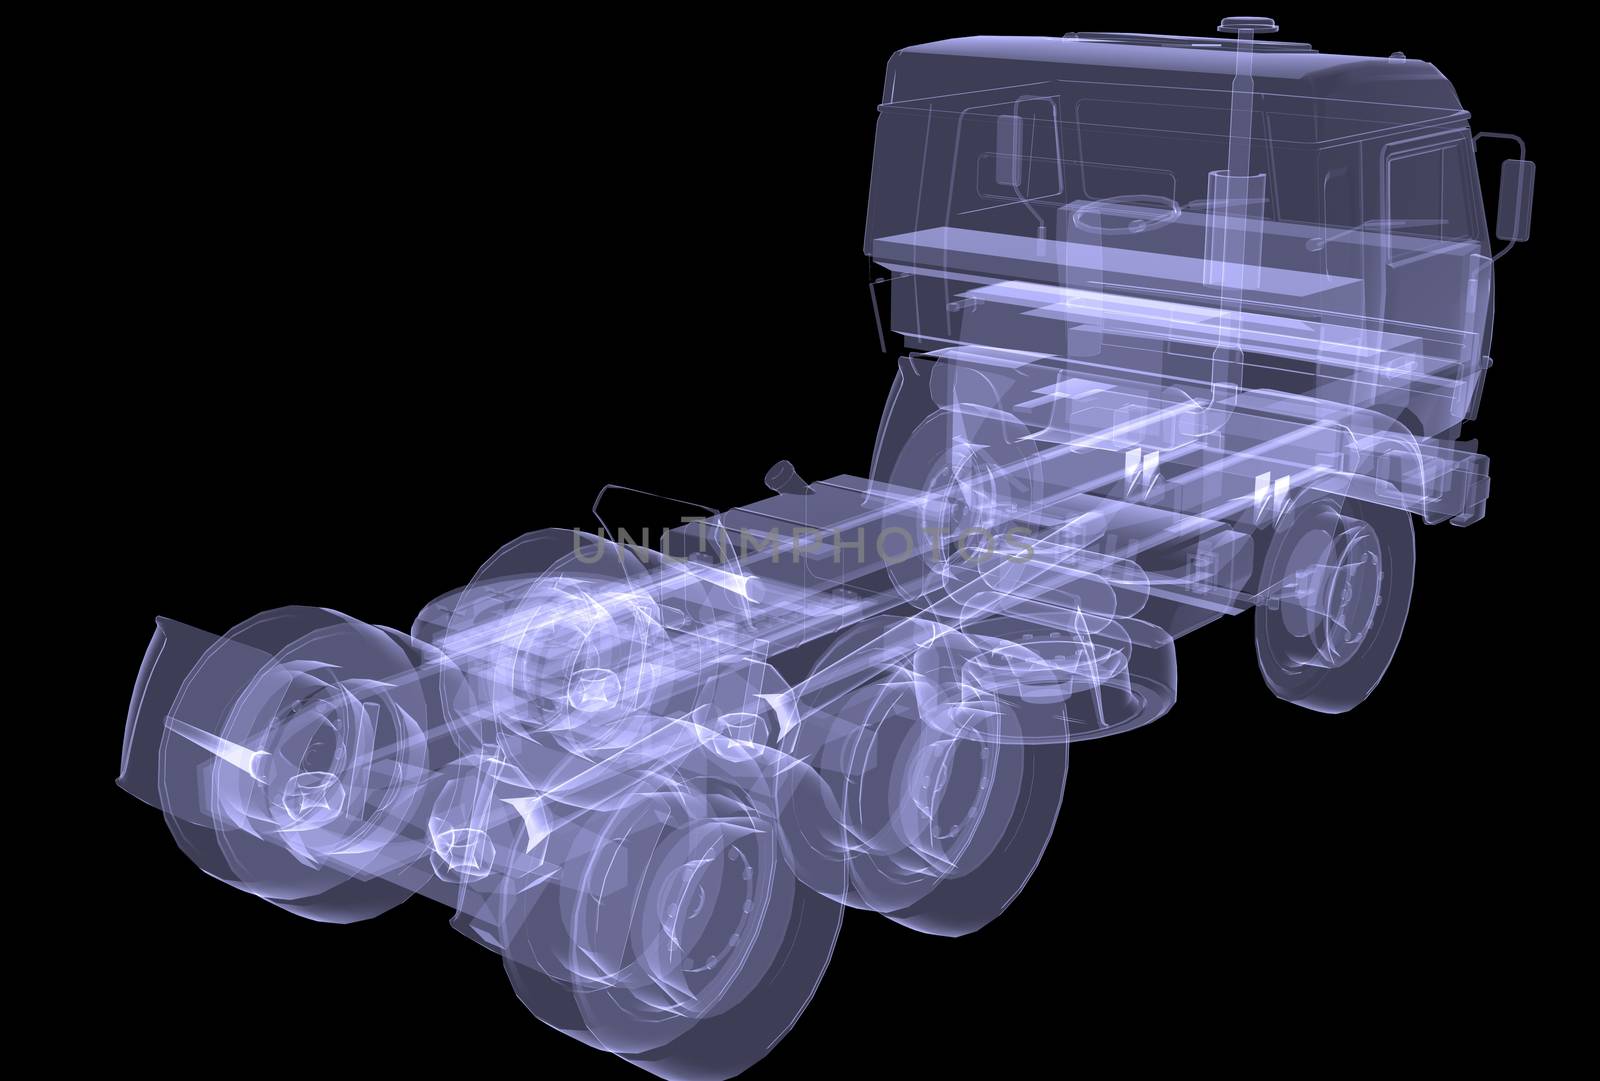 Big truck. X-ray. Isolated 3d render on black background